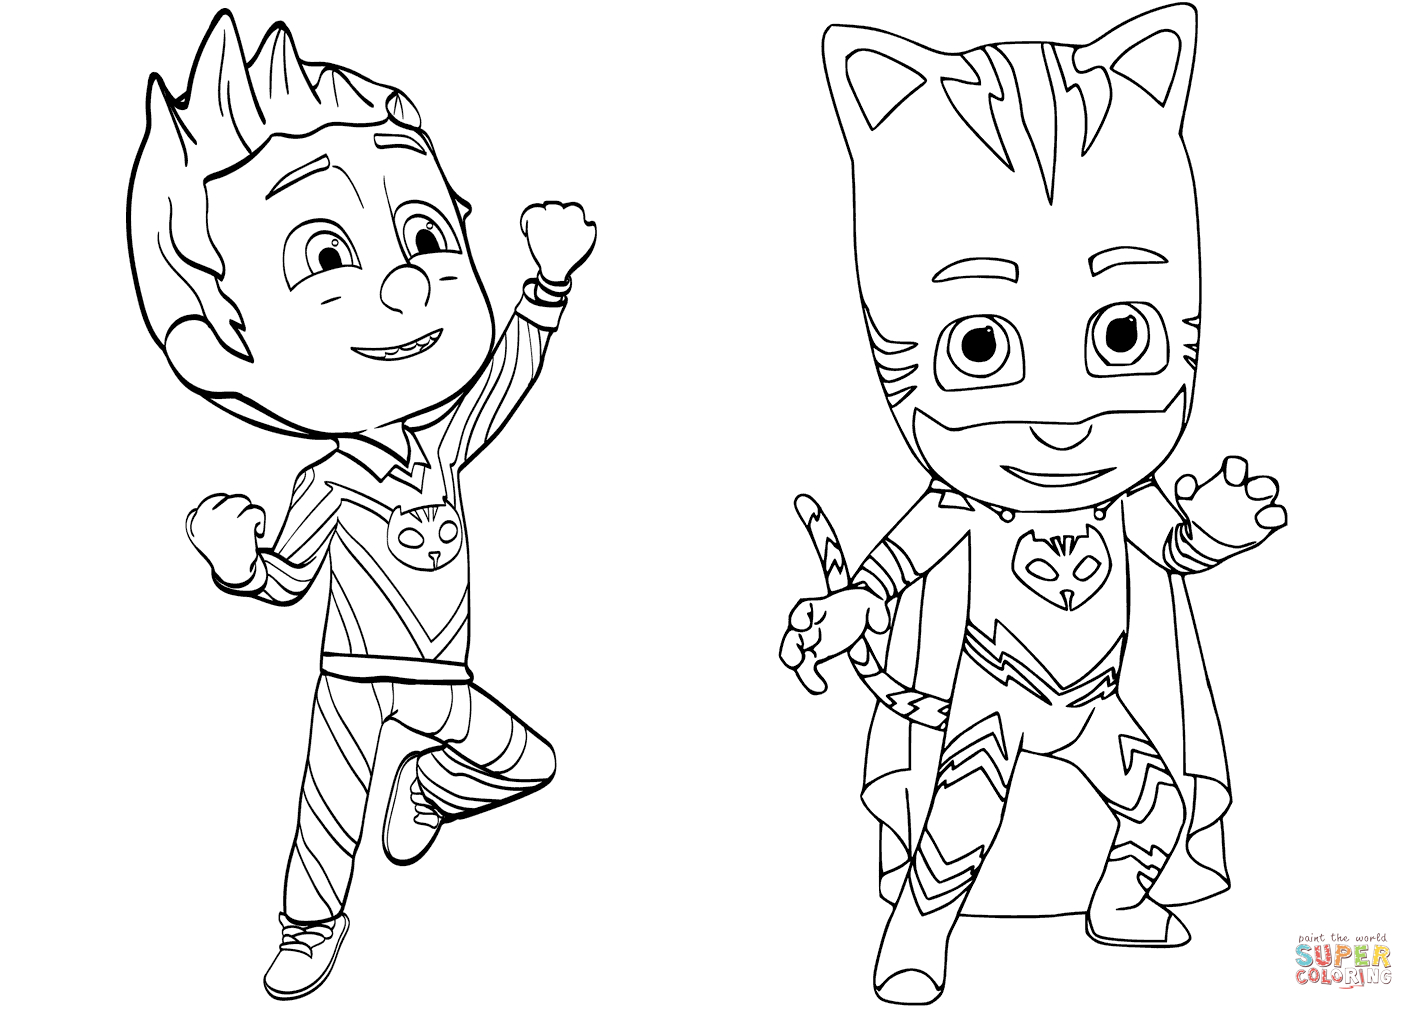 Pajama Hero Connor Is Catboy From Pj Masks Coloring Page | Free - Free Printable Pajama Coloring Pages